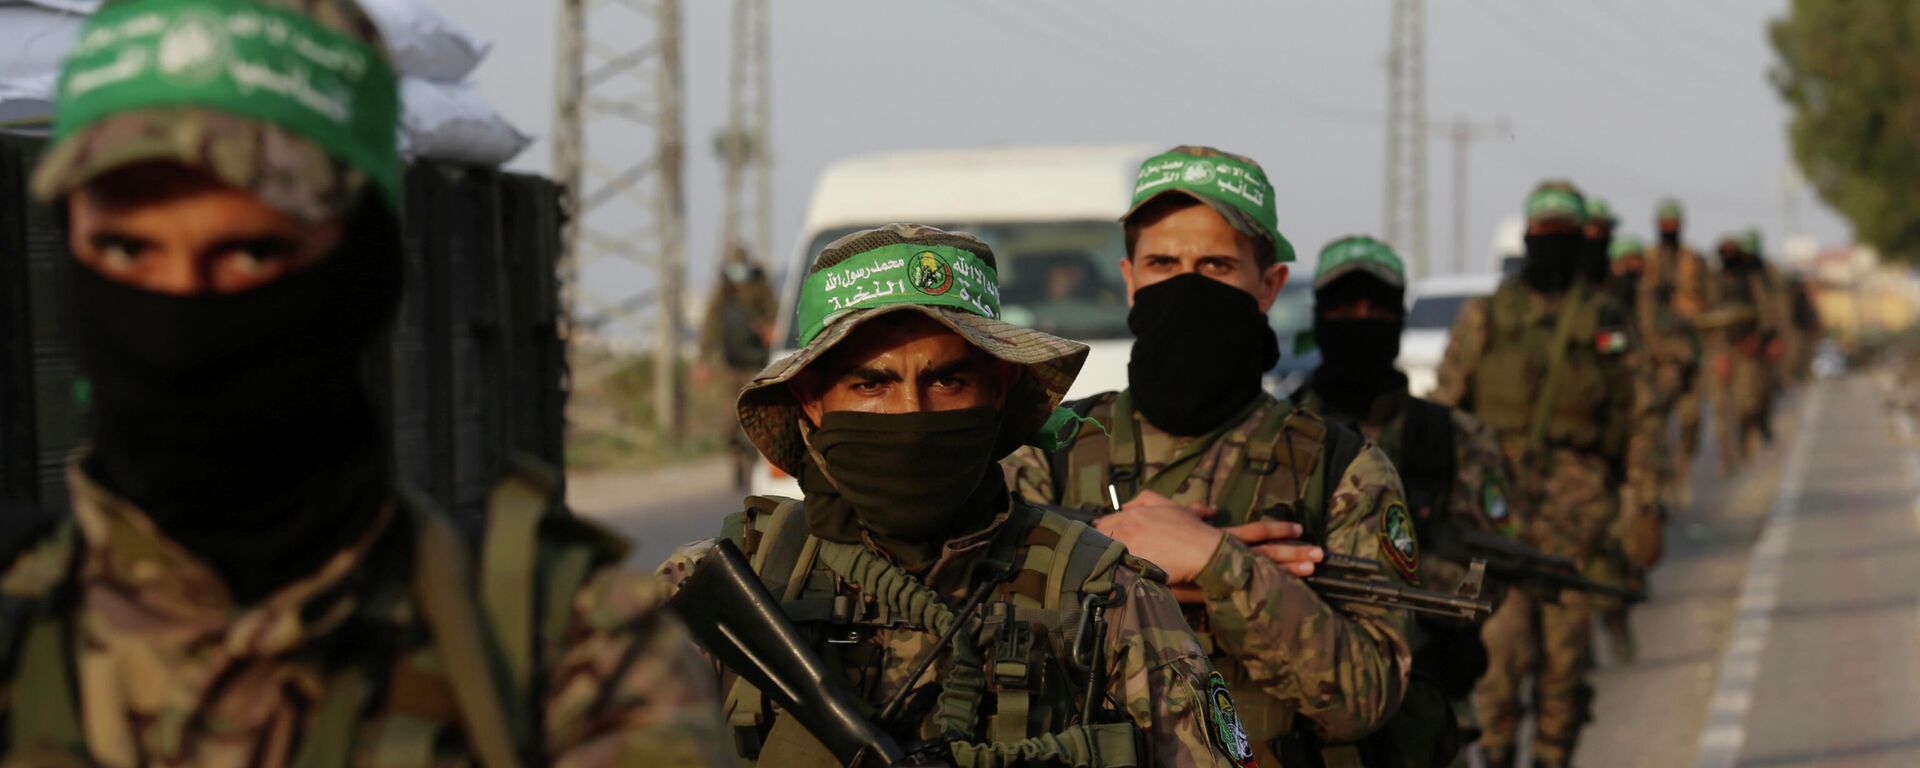 Masked militants from the Izzedine al-Qassam Brigades, a military wing of Hamas, march with their rifles along the main road of the Nusseirat refugee camp, central Gaza Strip, Thursday, 28 October 2021. - Sputnik International, 1920, 08.05.2022